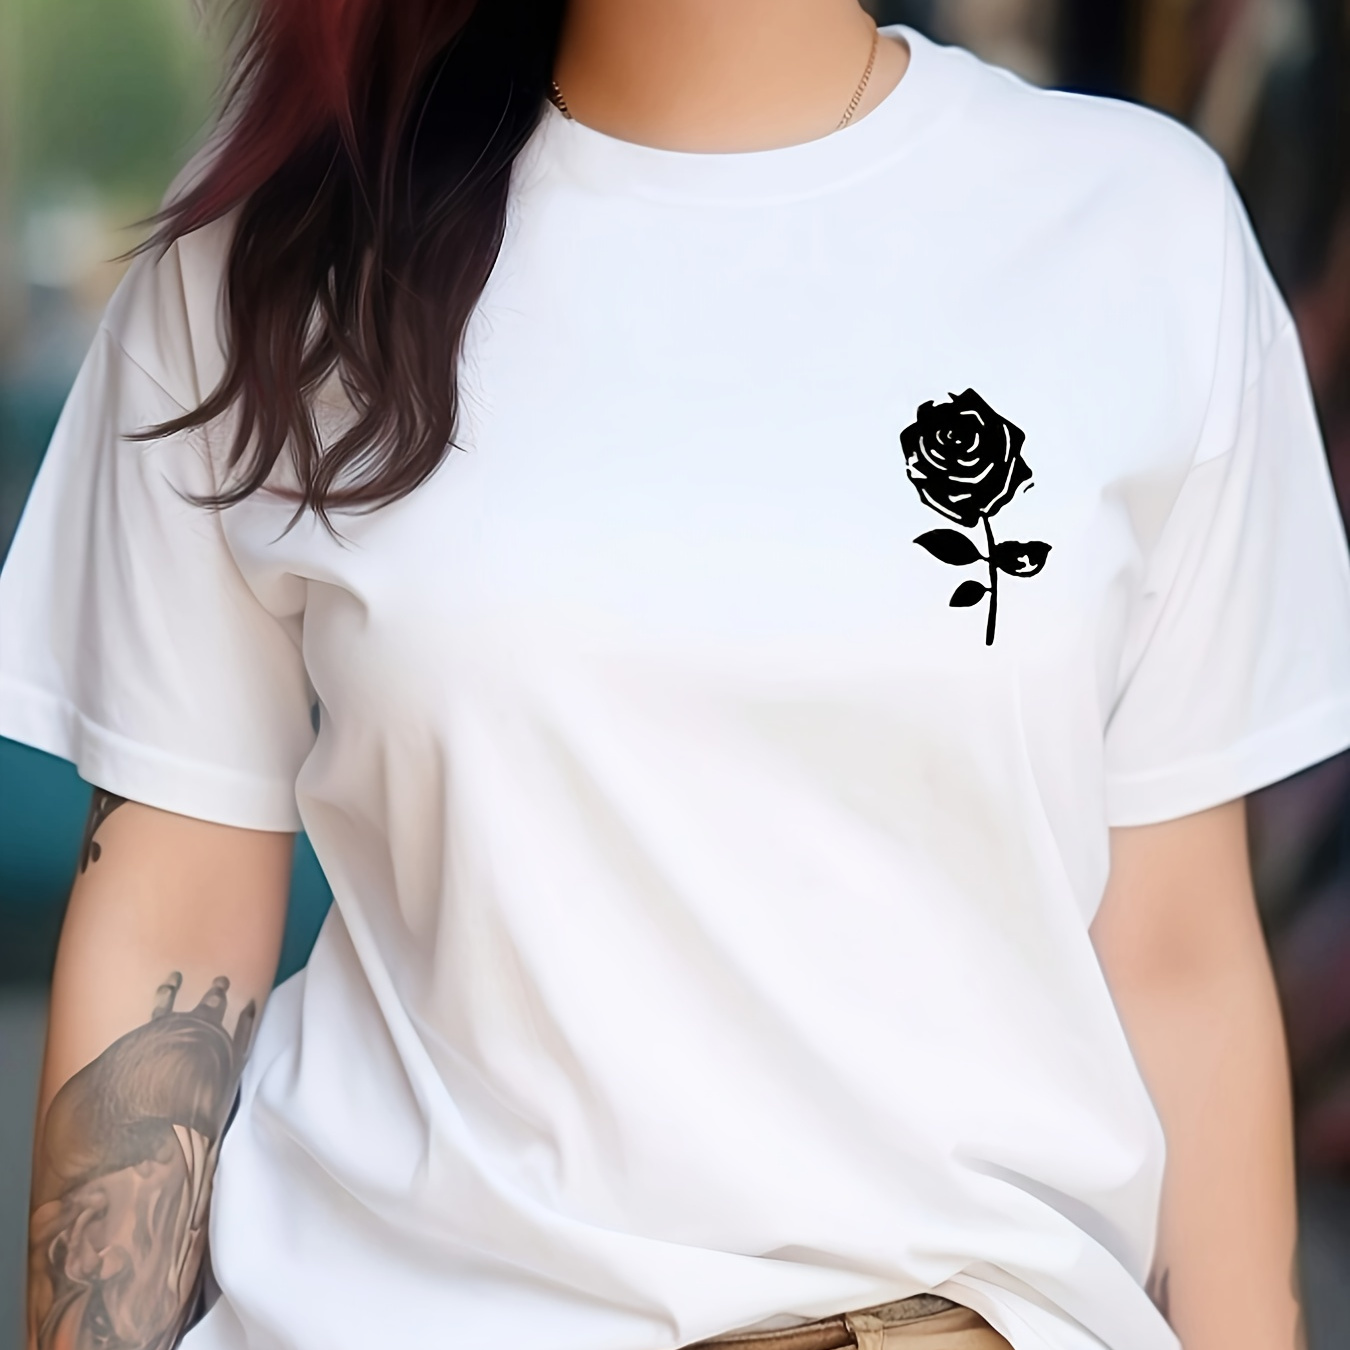 

Flower Graphic Short Sleeves Sports Tee, Round Neck Workout Causal T-shirt Top, Women's Activewear